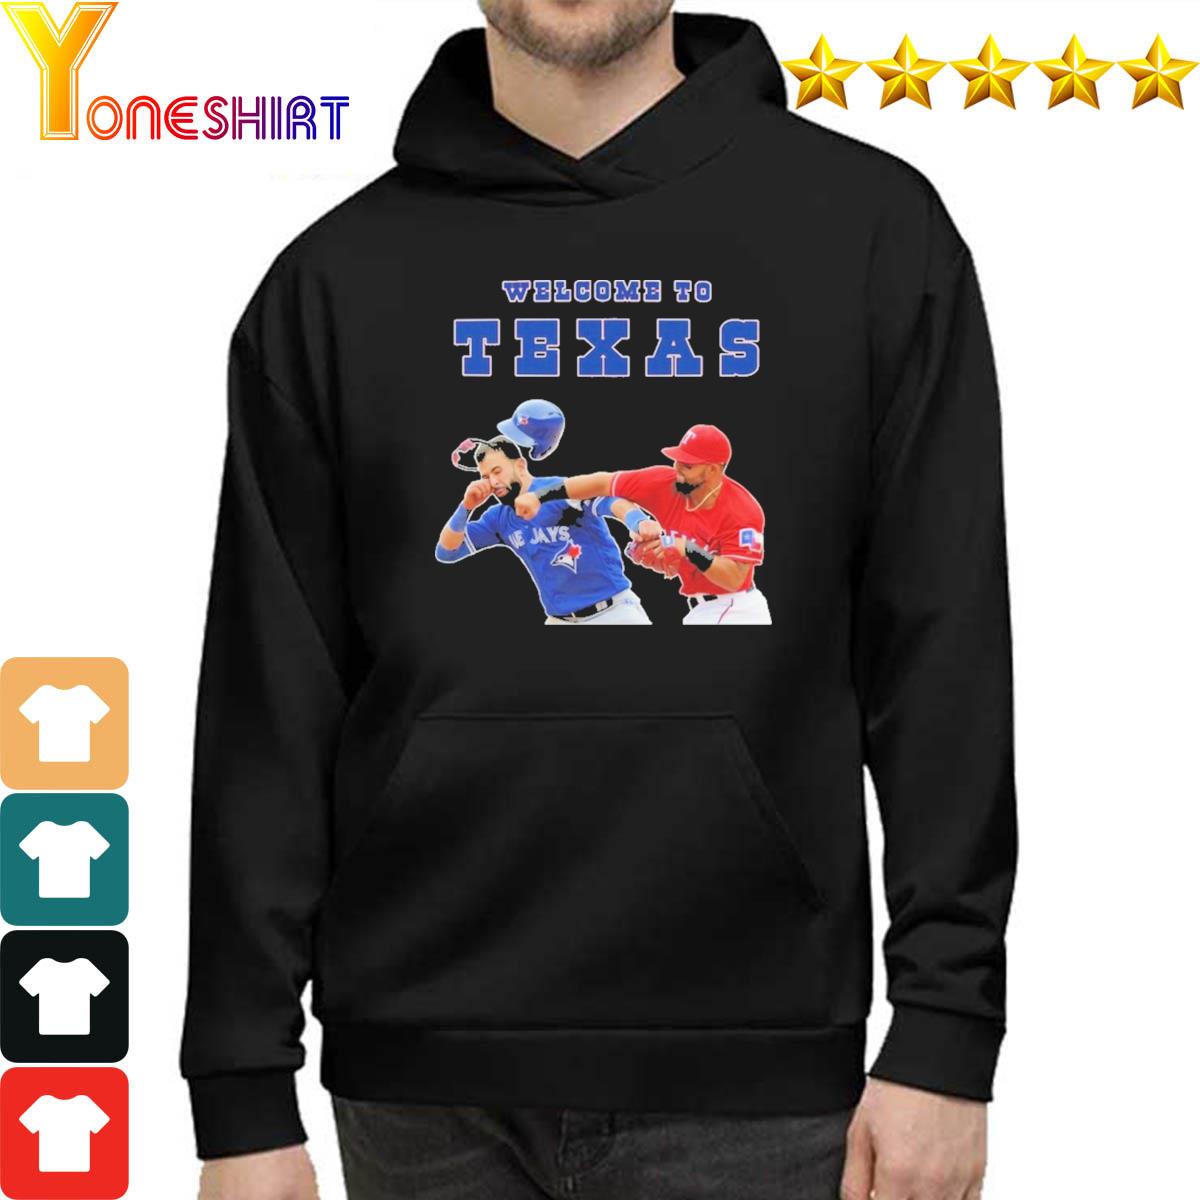 Welcome To Texas Rougned Odor Jose Batista Punch Shirt, hoodie